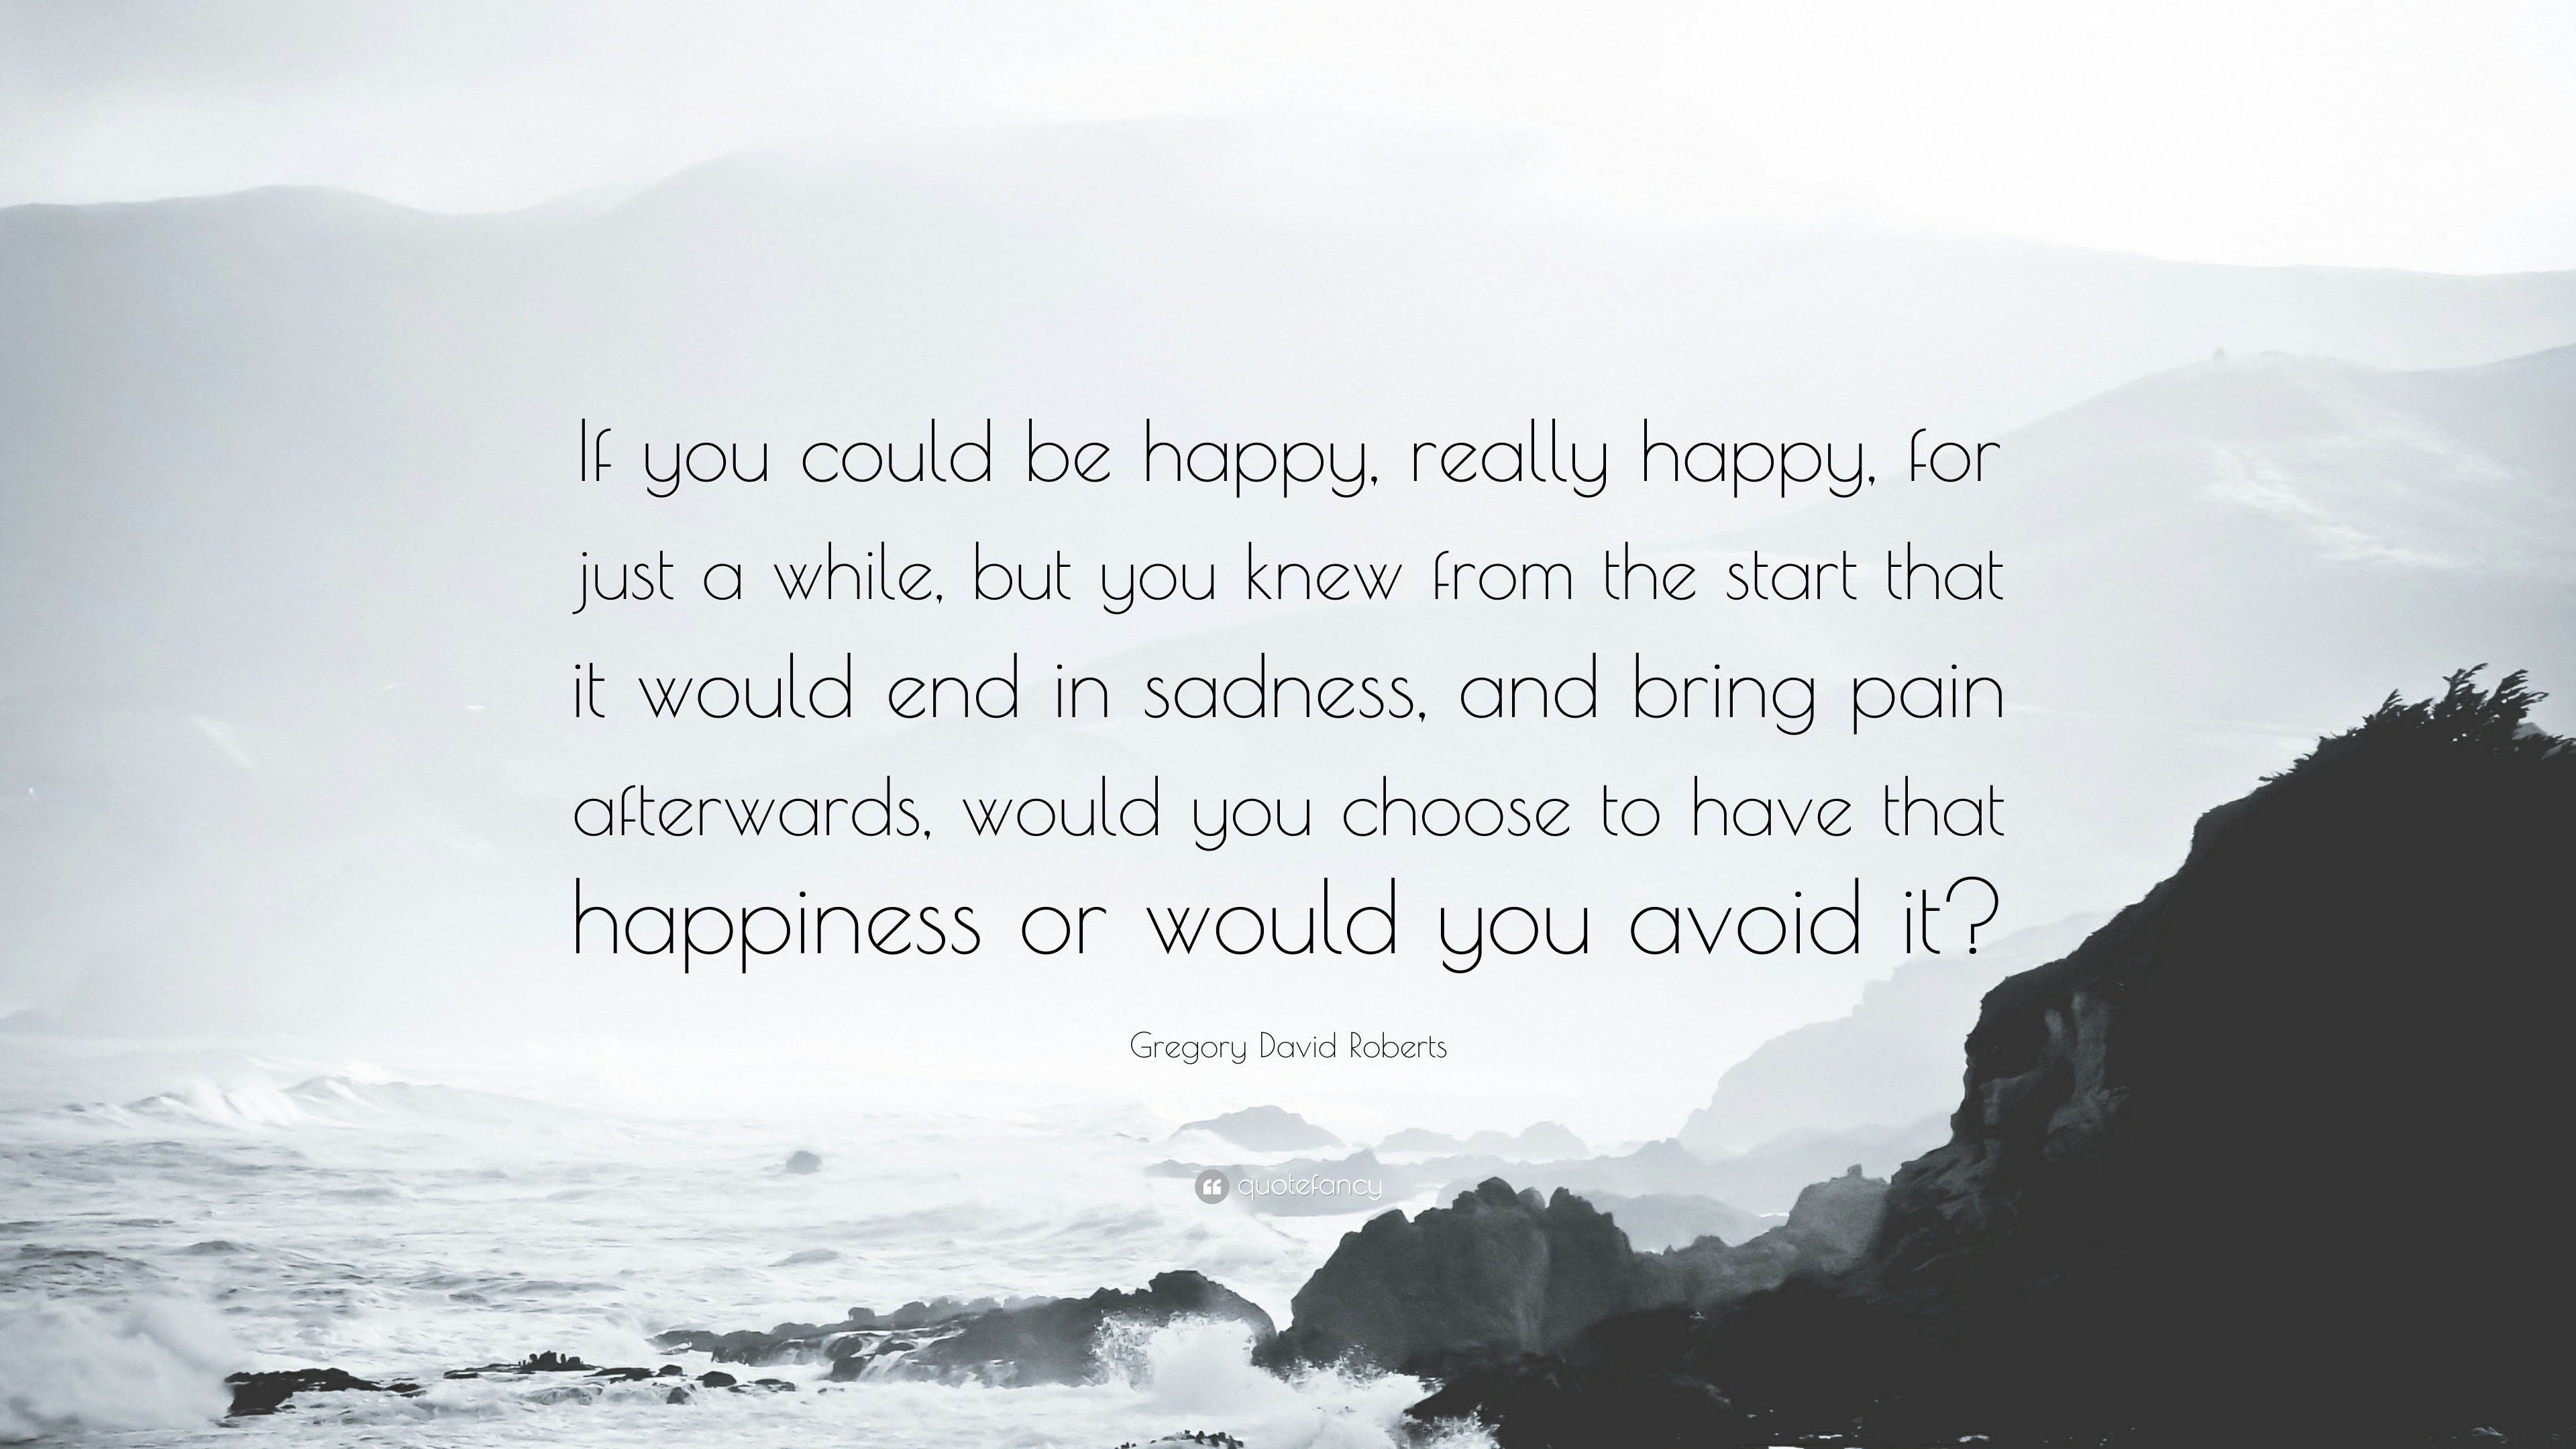 Gregory David Roberts Quote If You Could Be Happy Really Happy For Just A While But You Knew From The Start That It Would End In Sadness And Bri